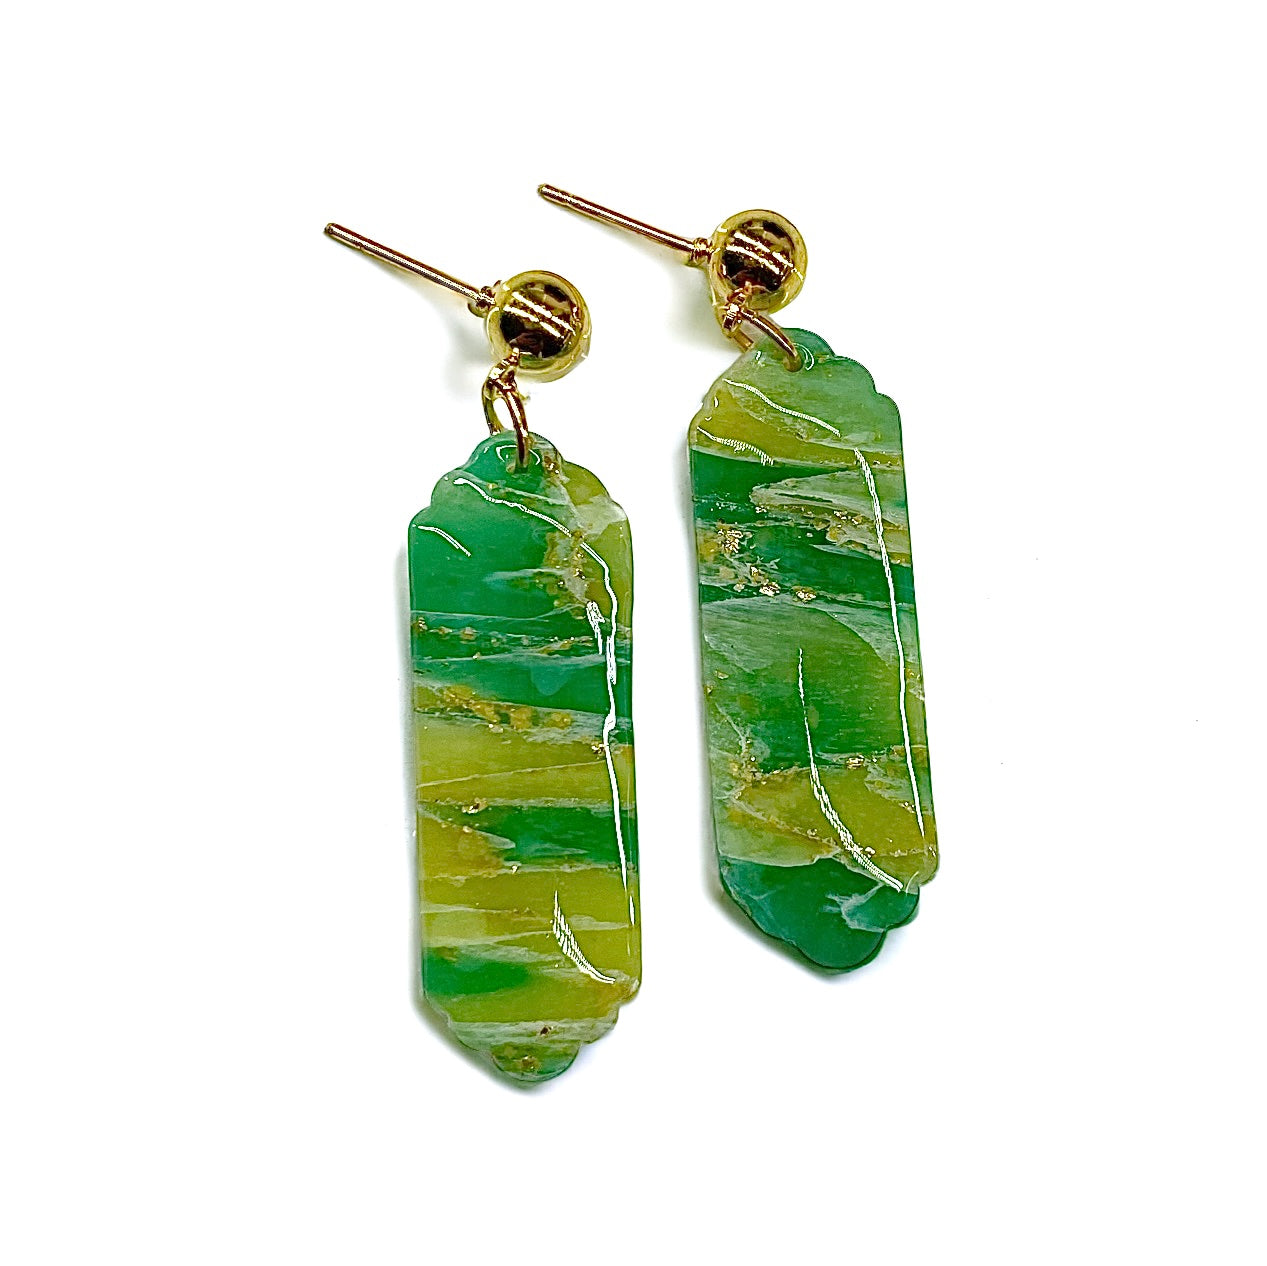 Green Marbleized Dangle Earrings with Scalloped Edge